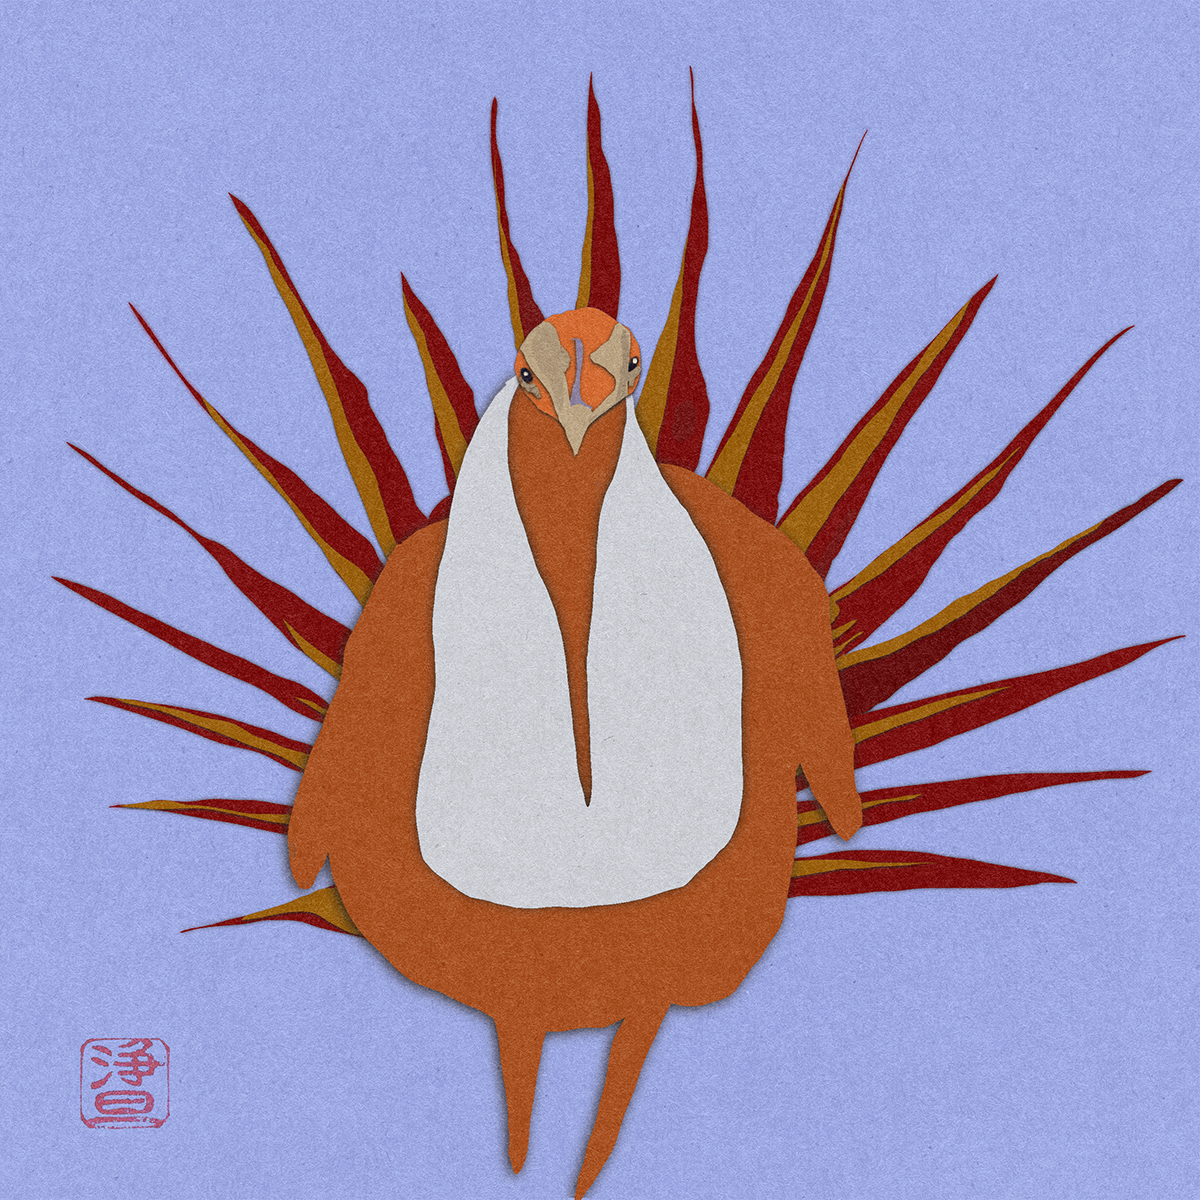 Fanciful Grouse